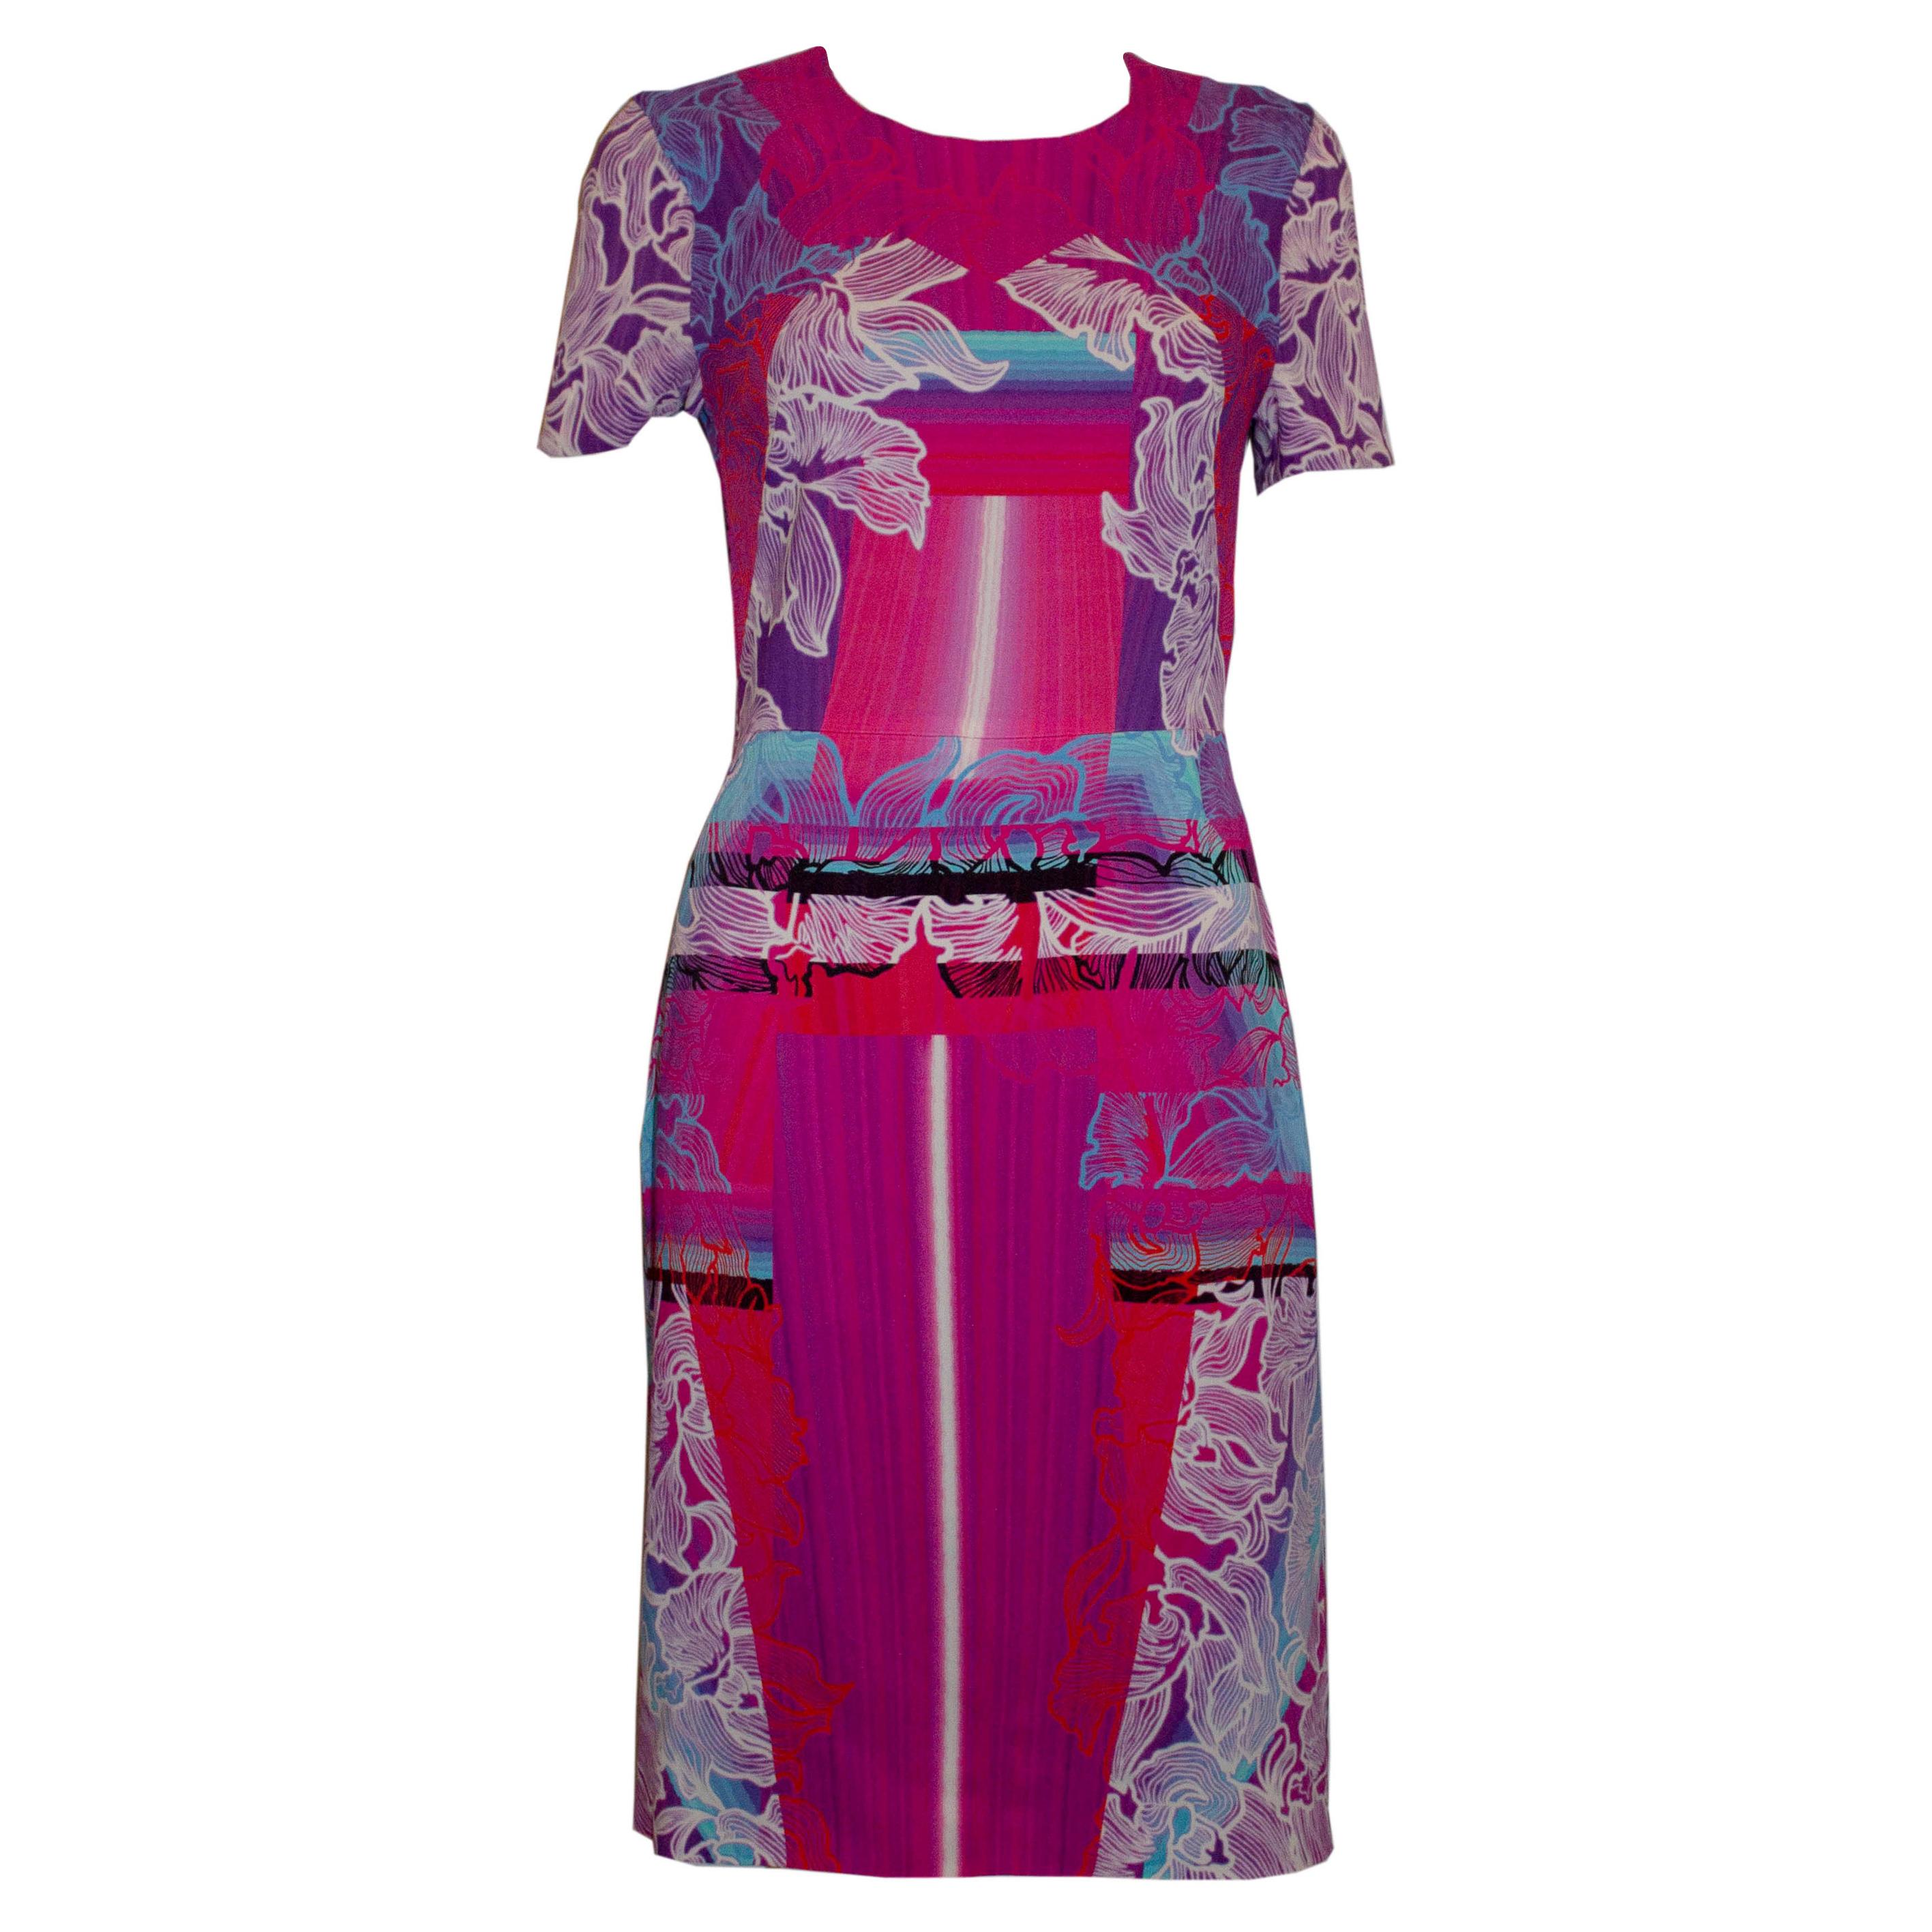 Peter Pilotto Colourful Day dress